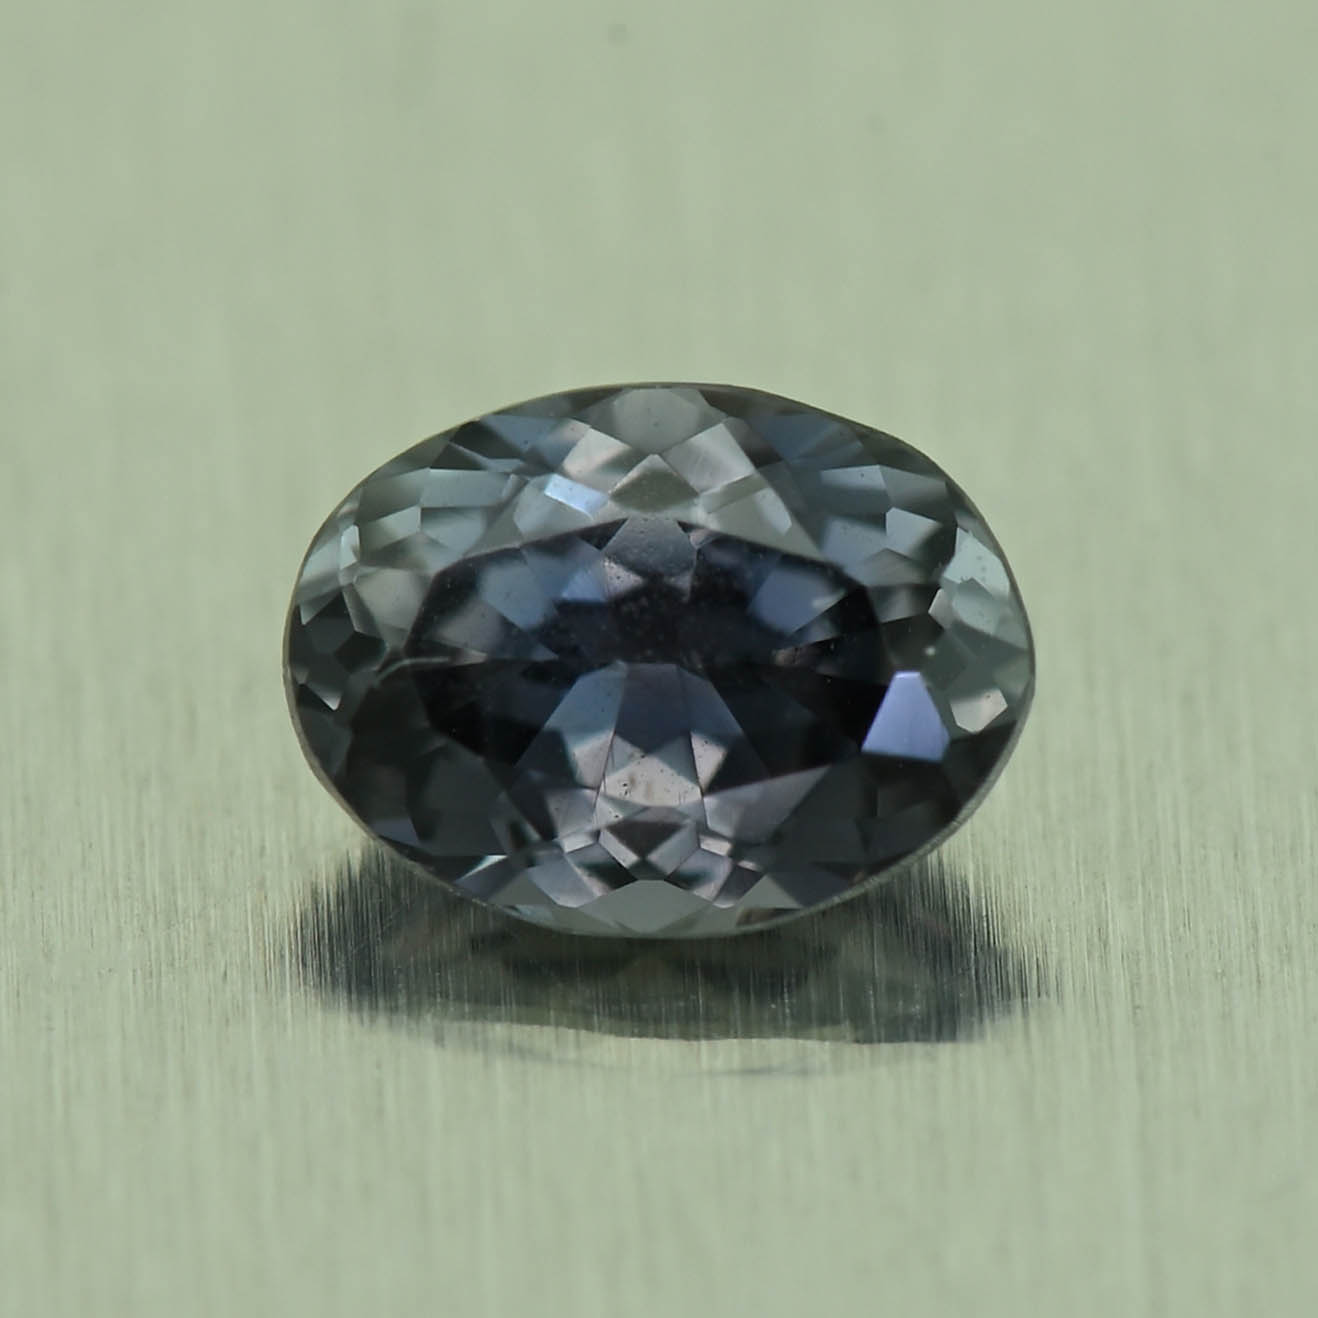 ColorChangeSapphire_oval_5.9x4.4mm_0.63cts_N_sa737_day